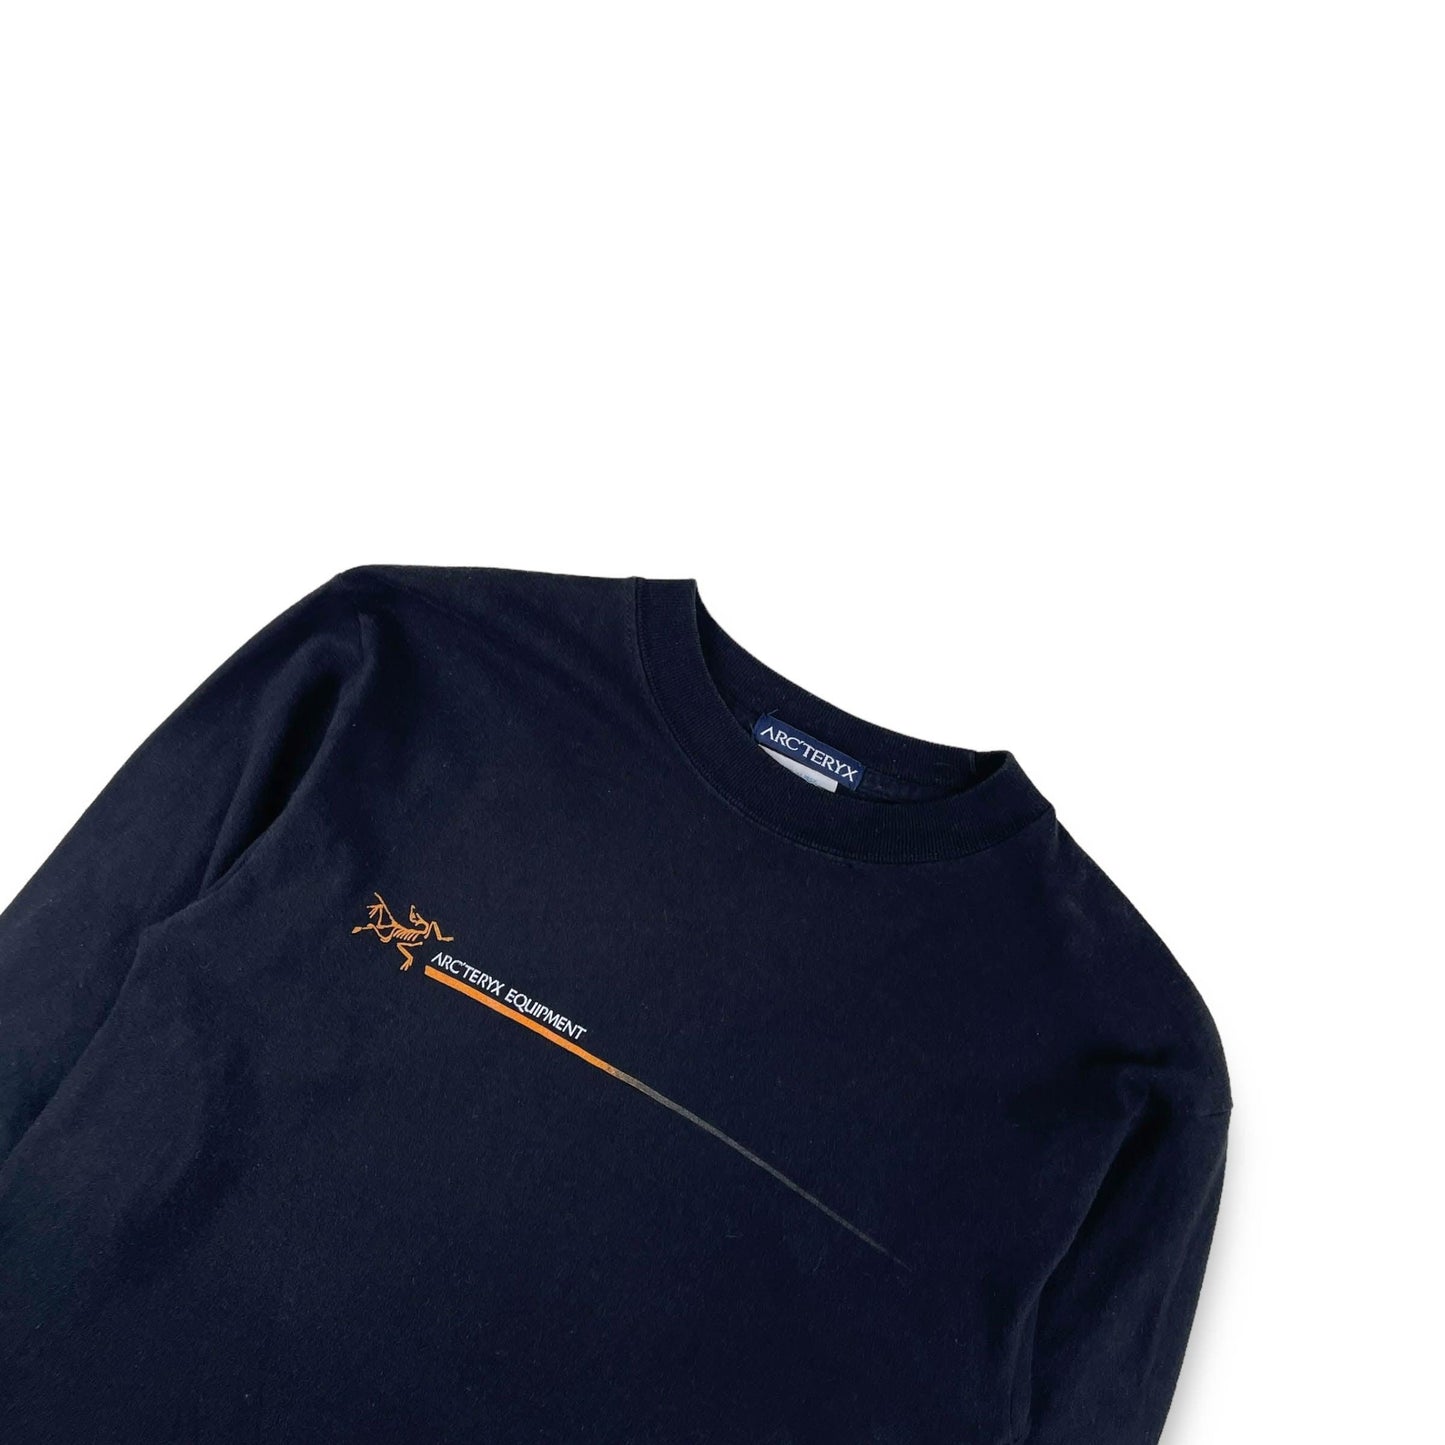 Vintage Arc'teryx Long Sleeve T-shirt (S) - Known Source